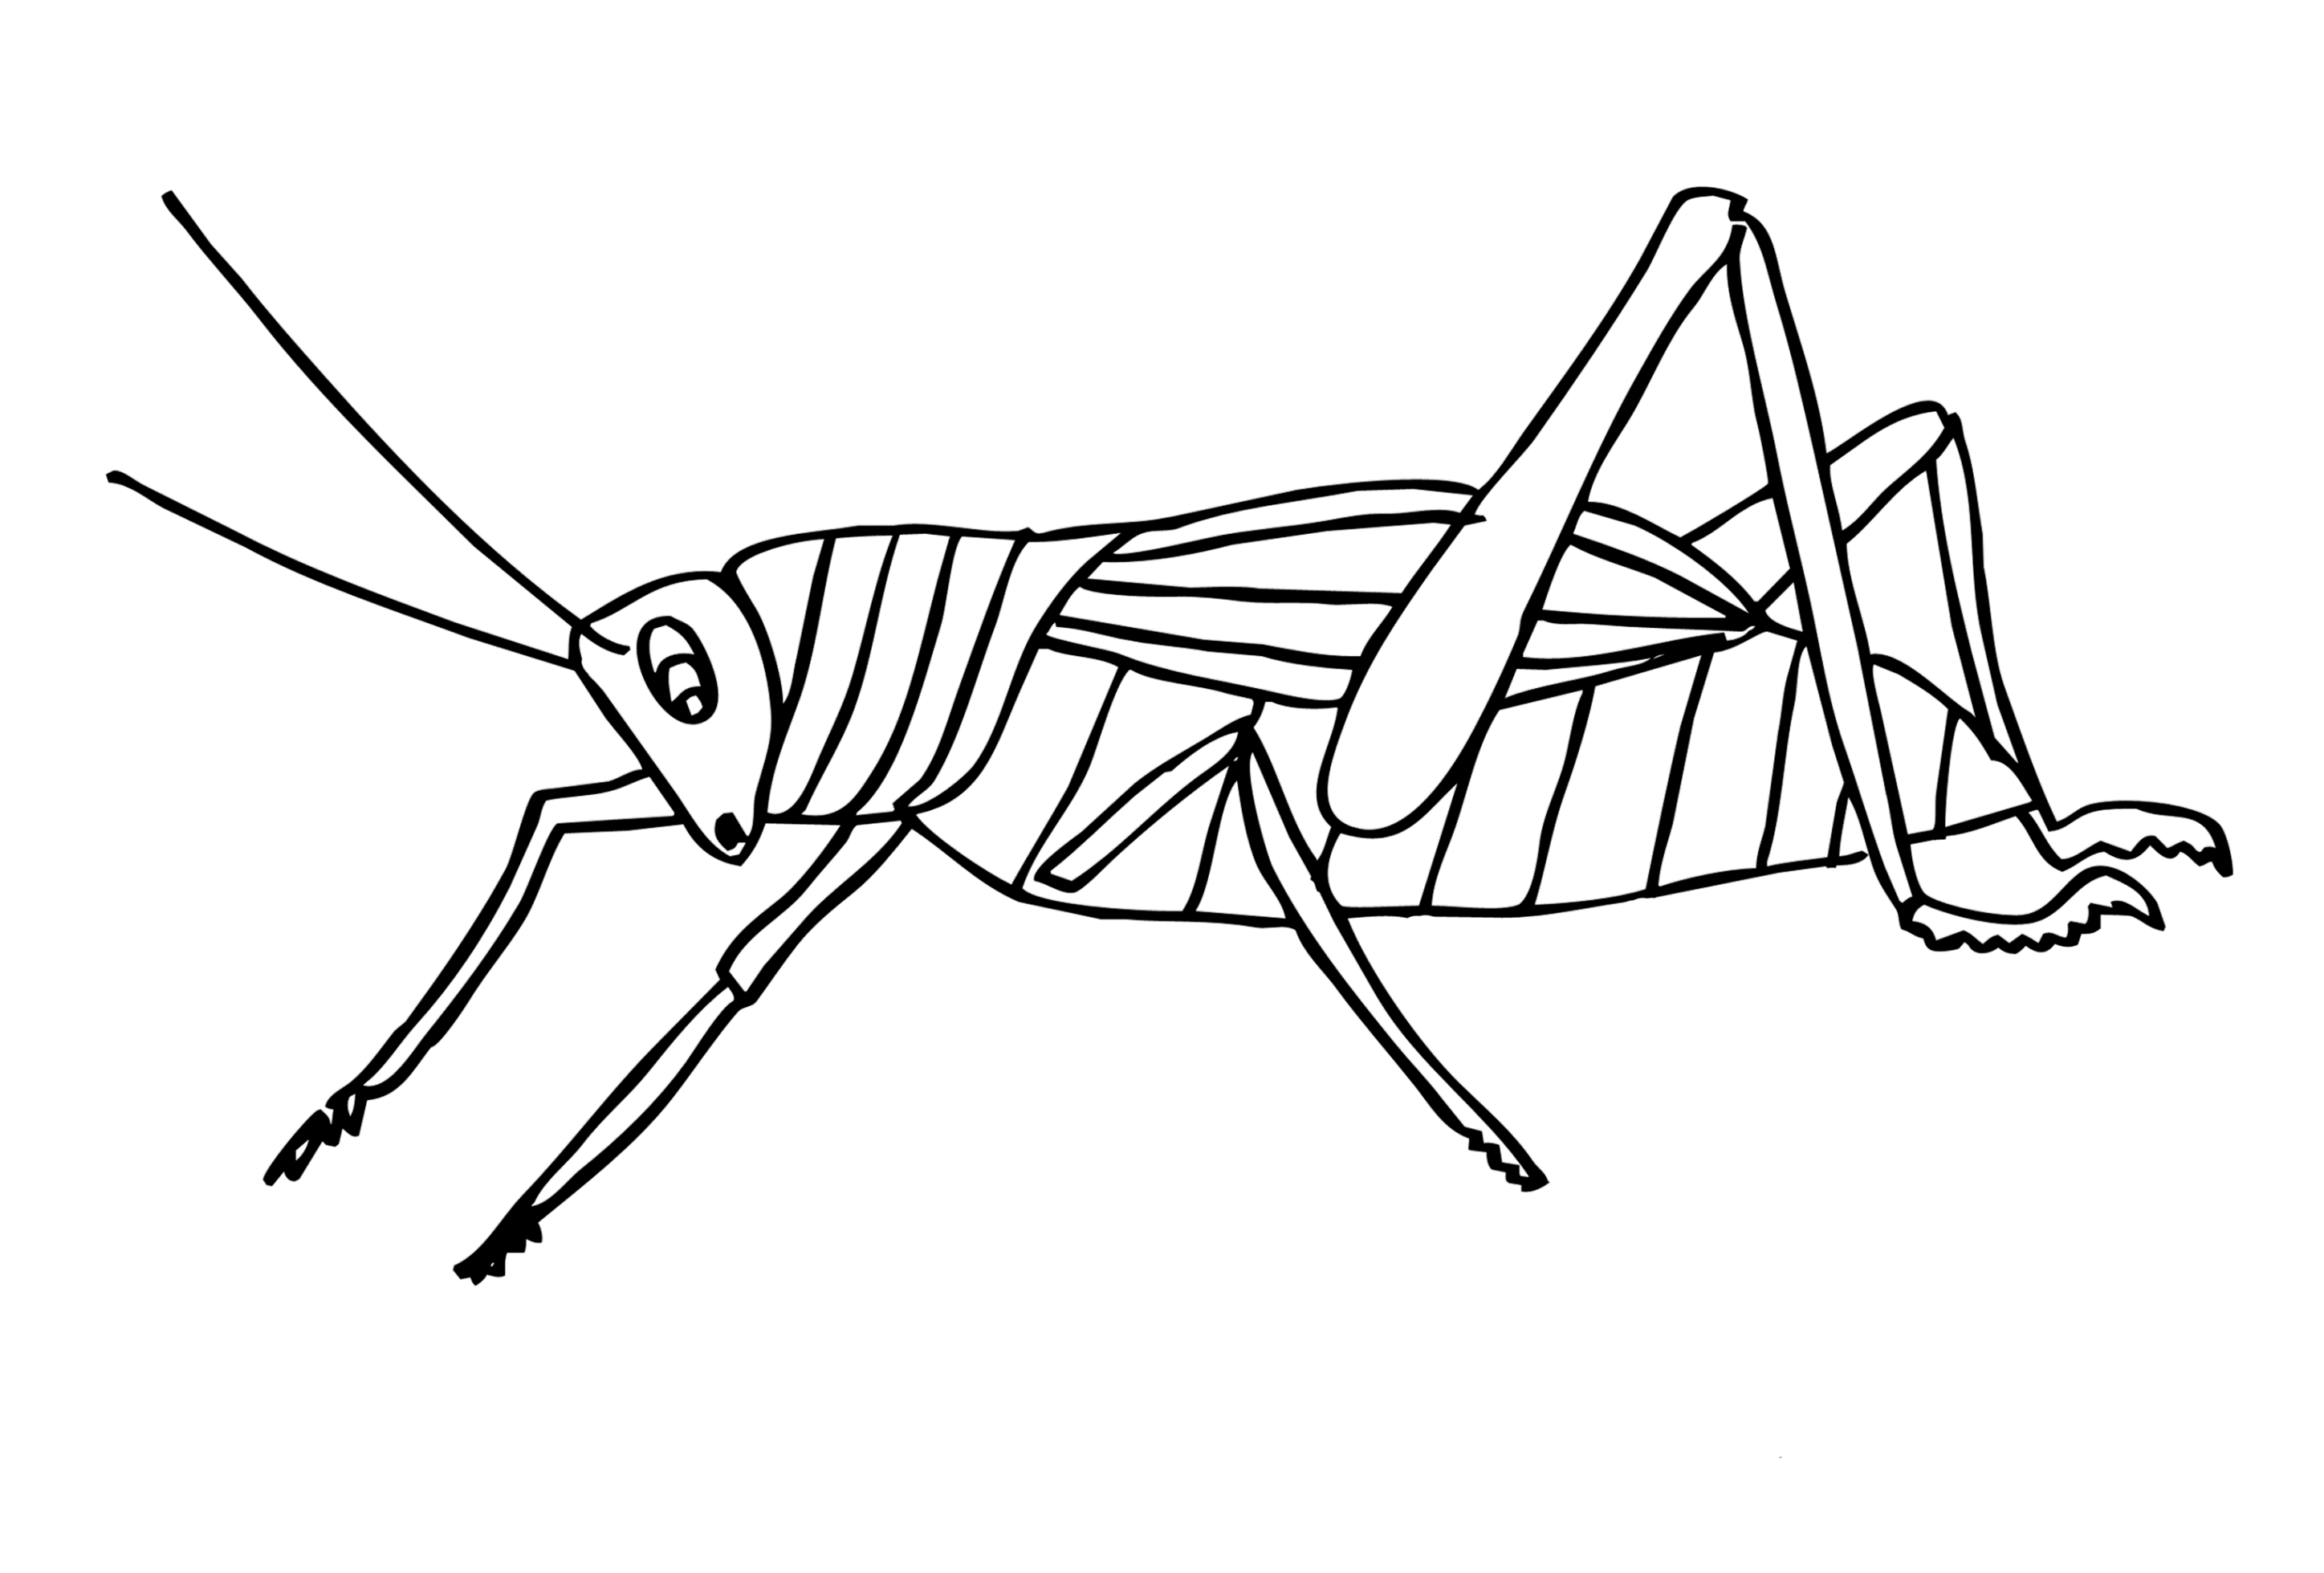 Grasshopper Coloring Pages to download and print for free